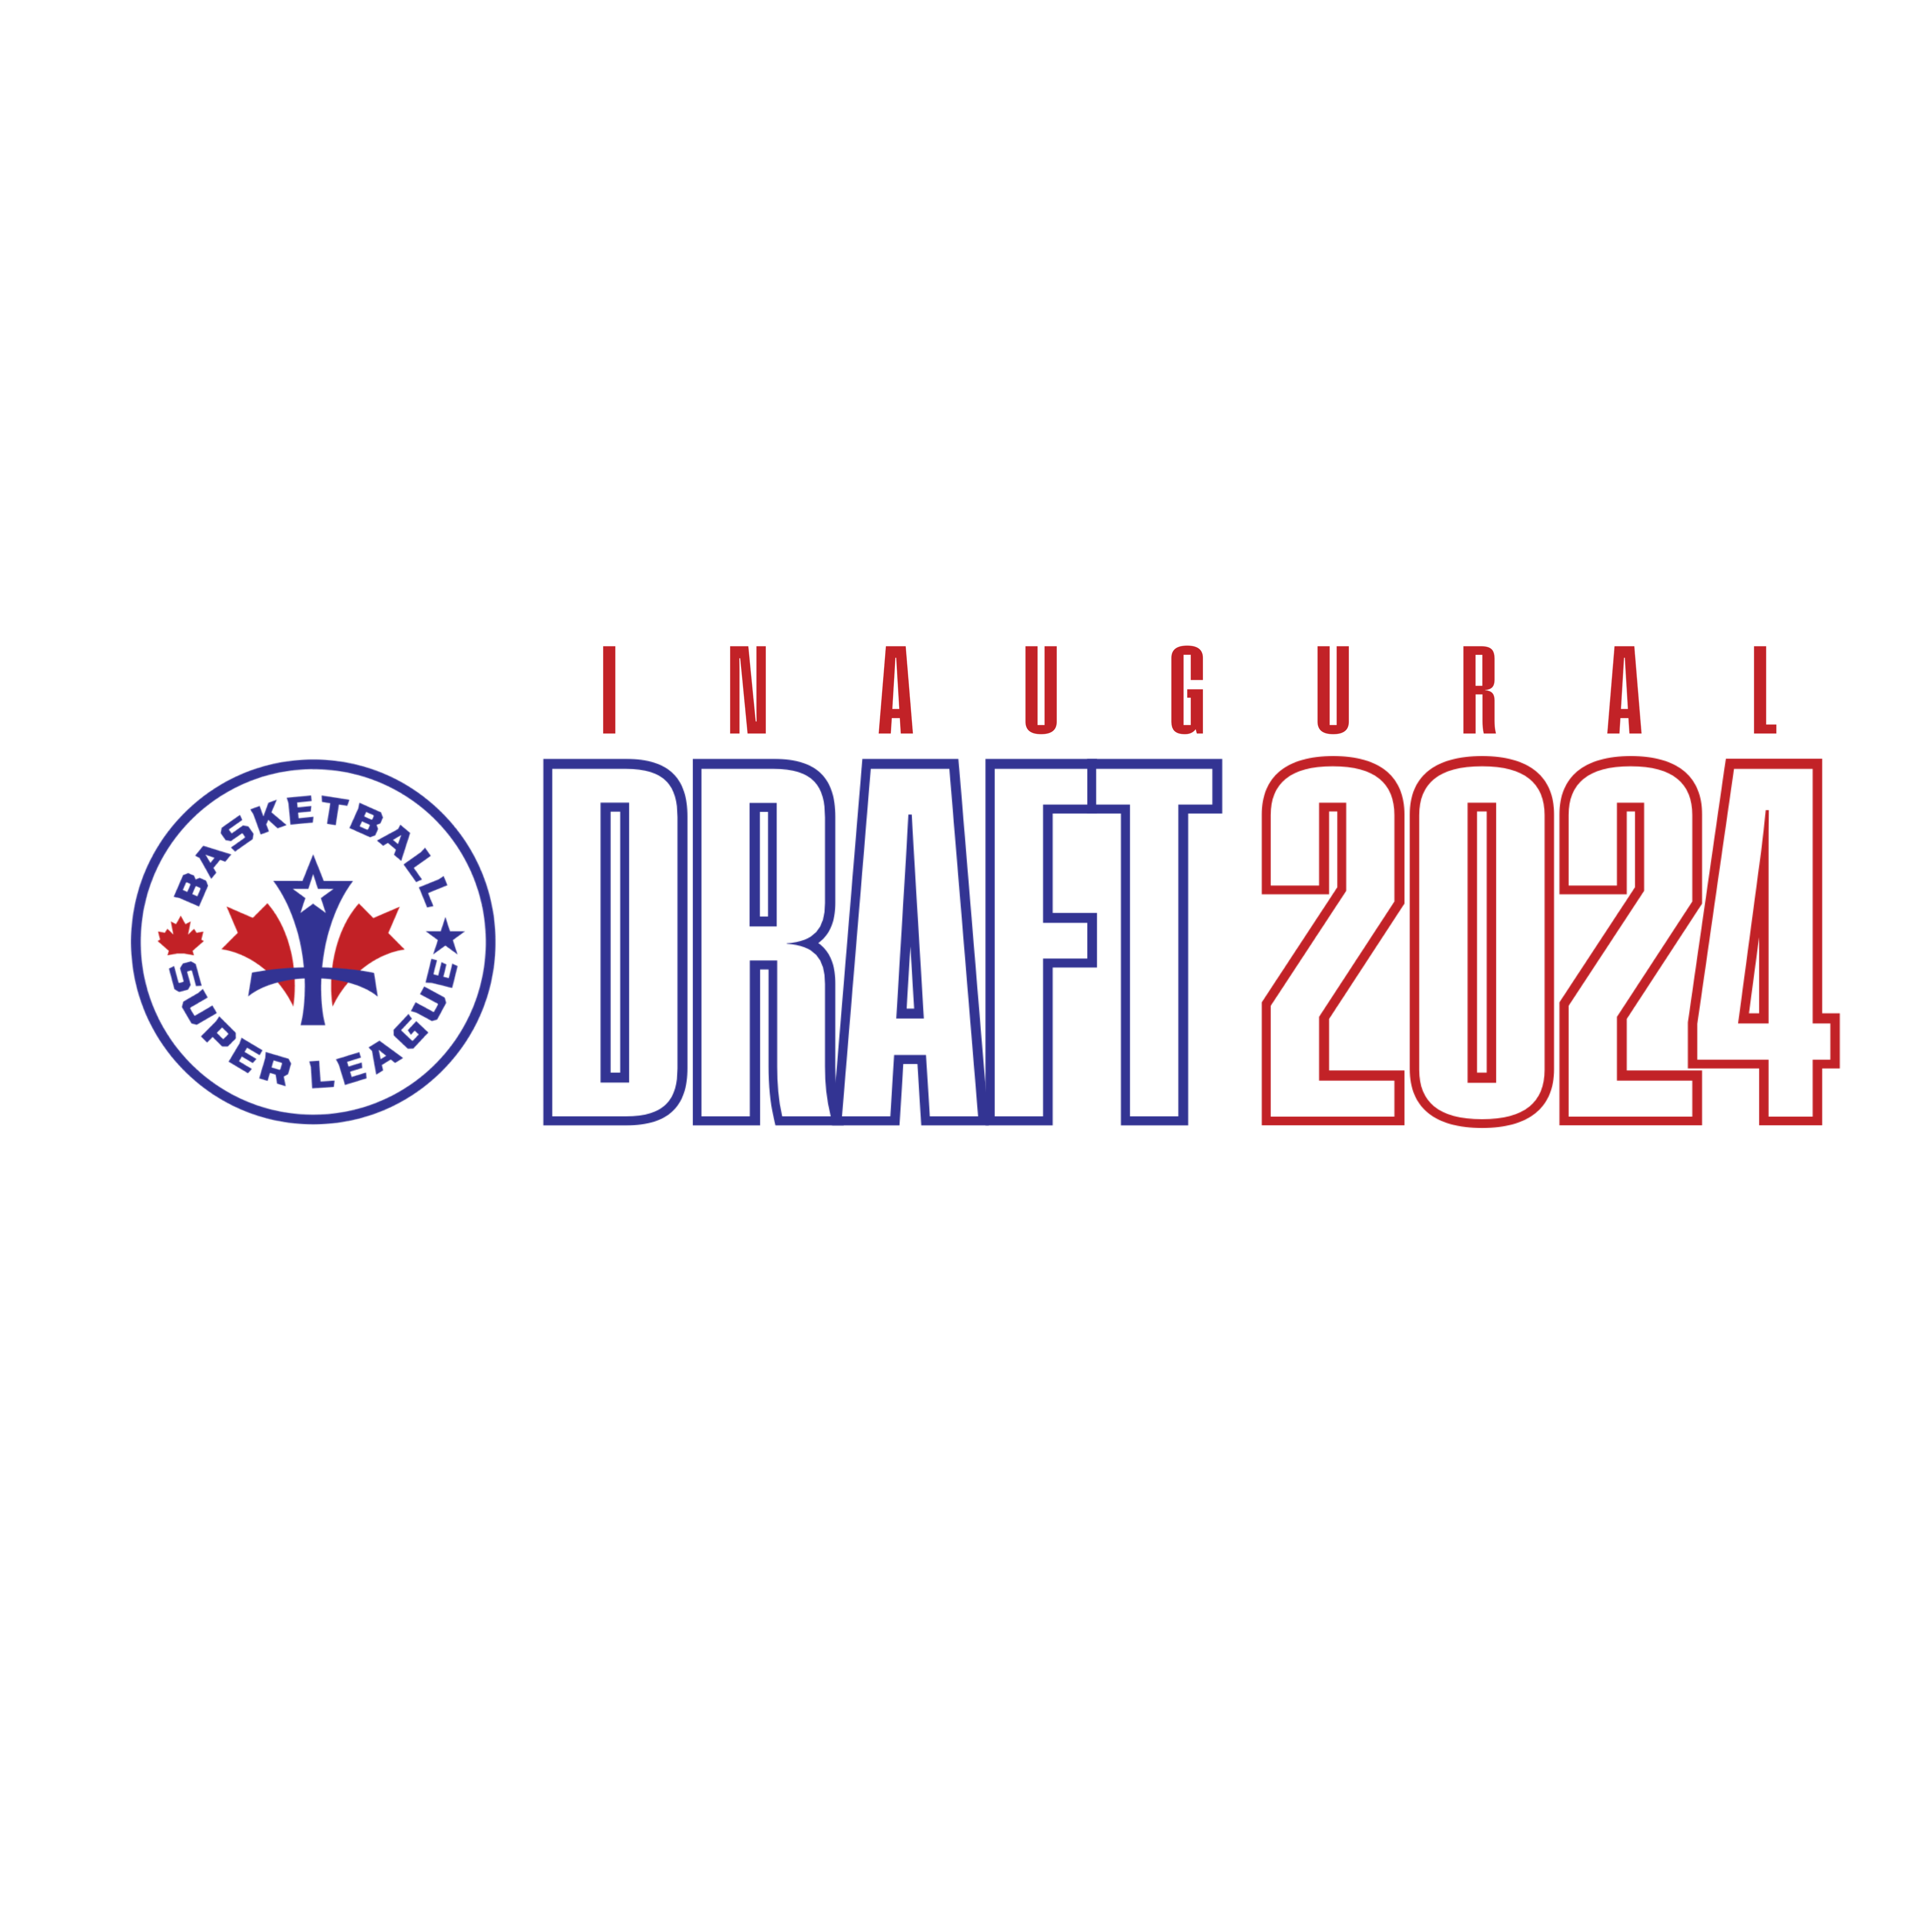 Inaugural BSL 2024 Draft Combine and Draft Provides Chance For Players